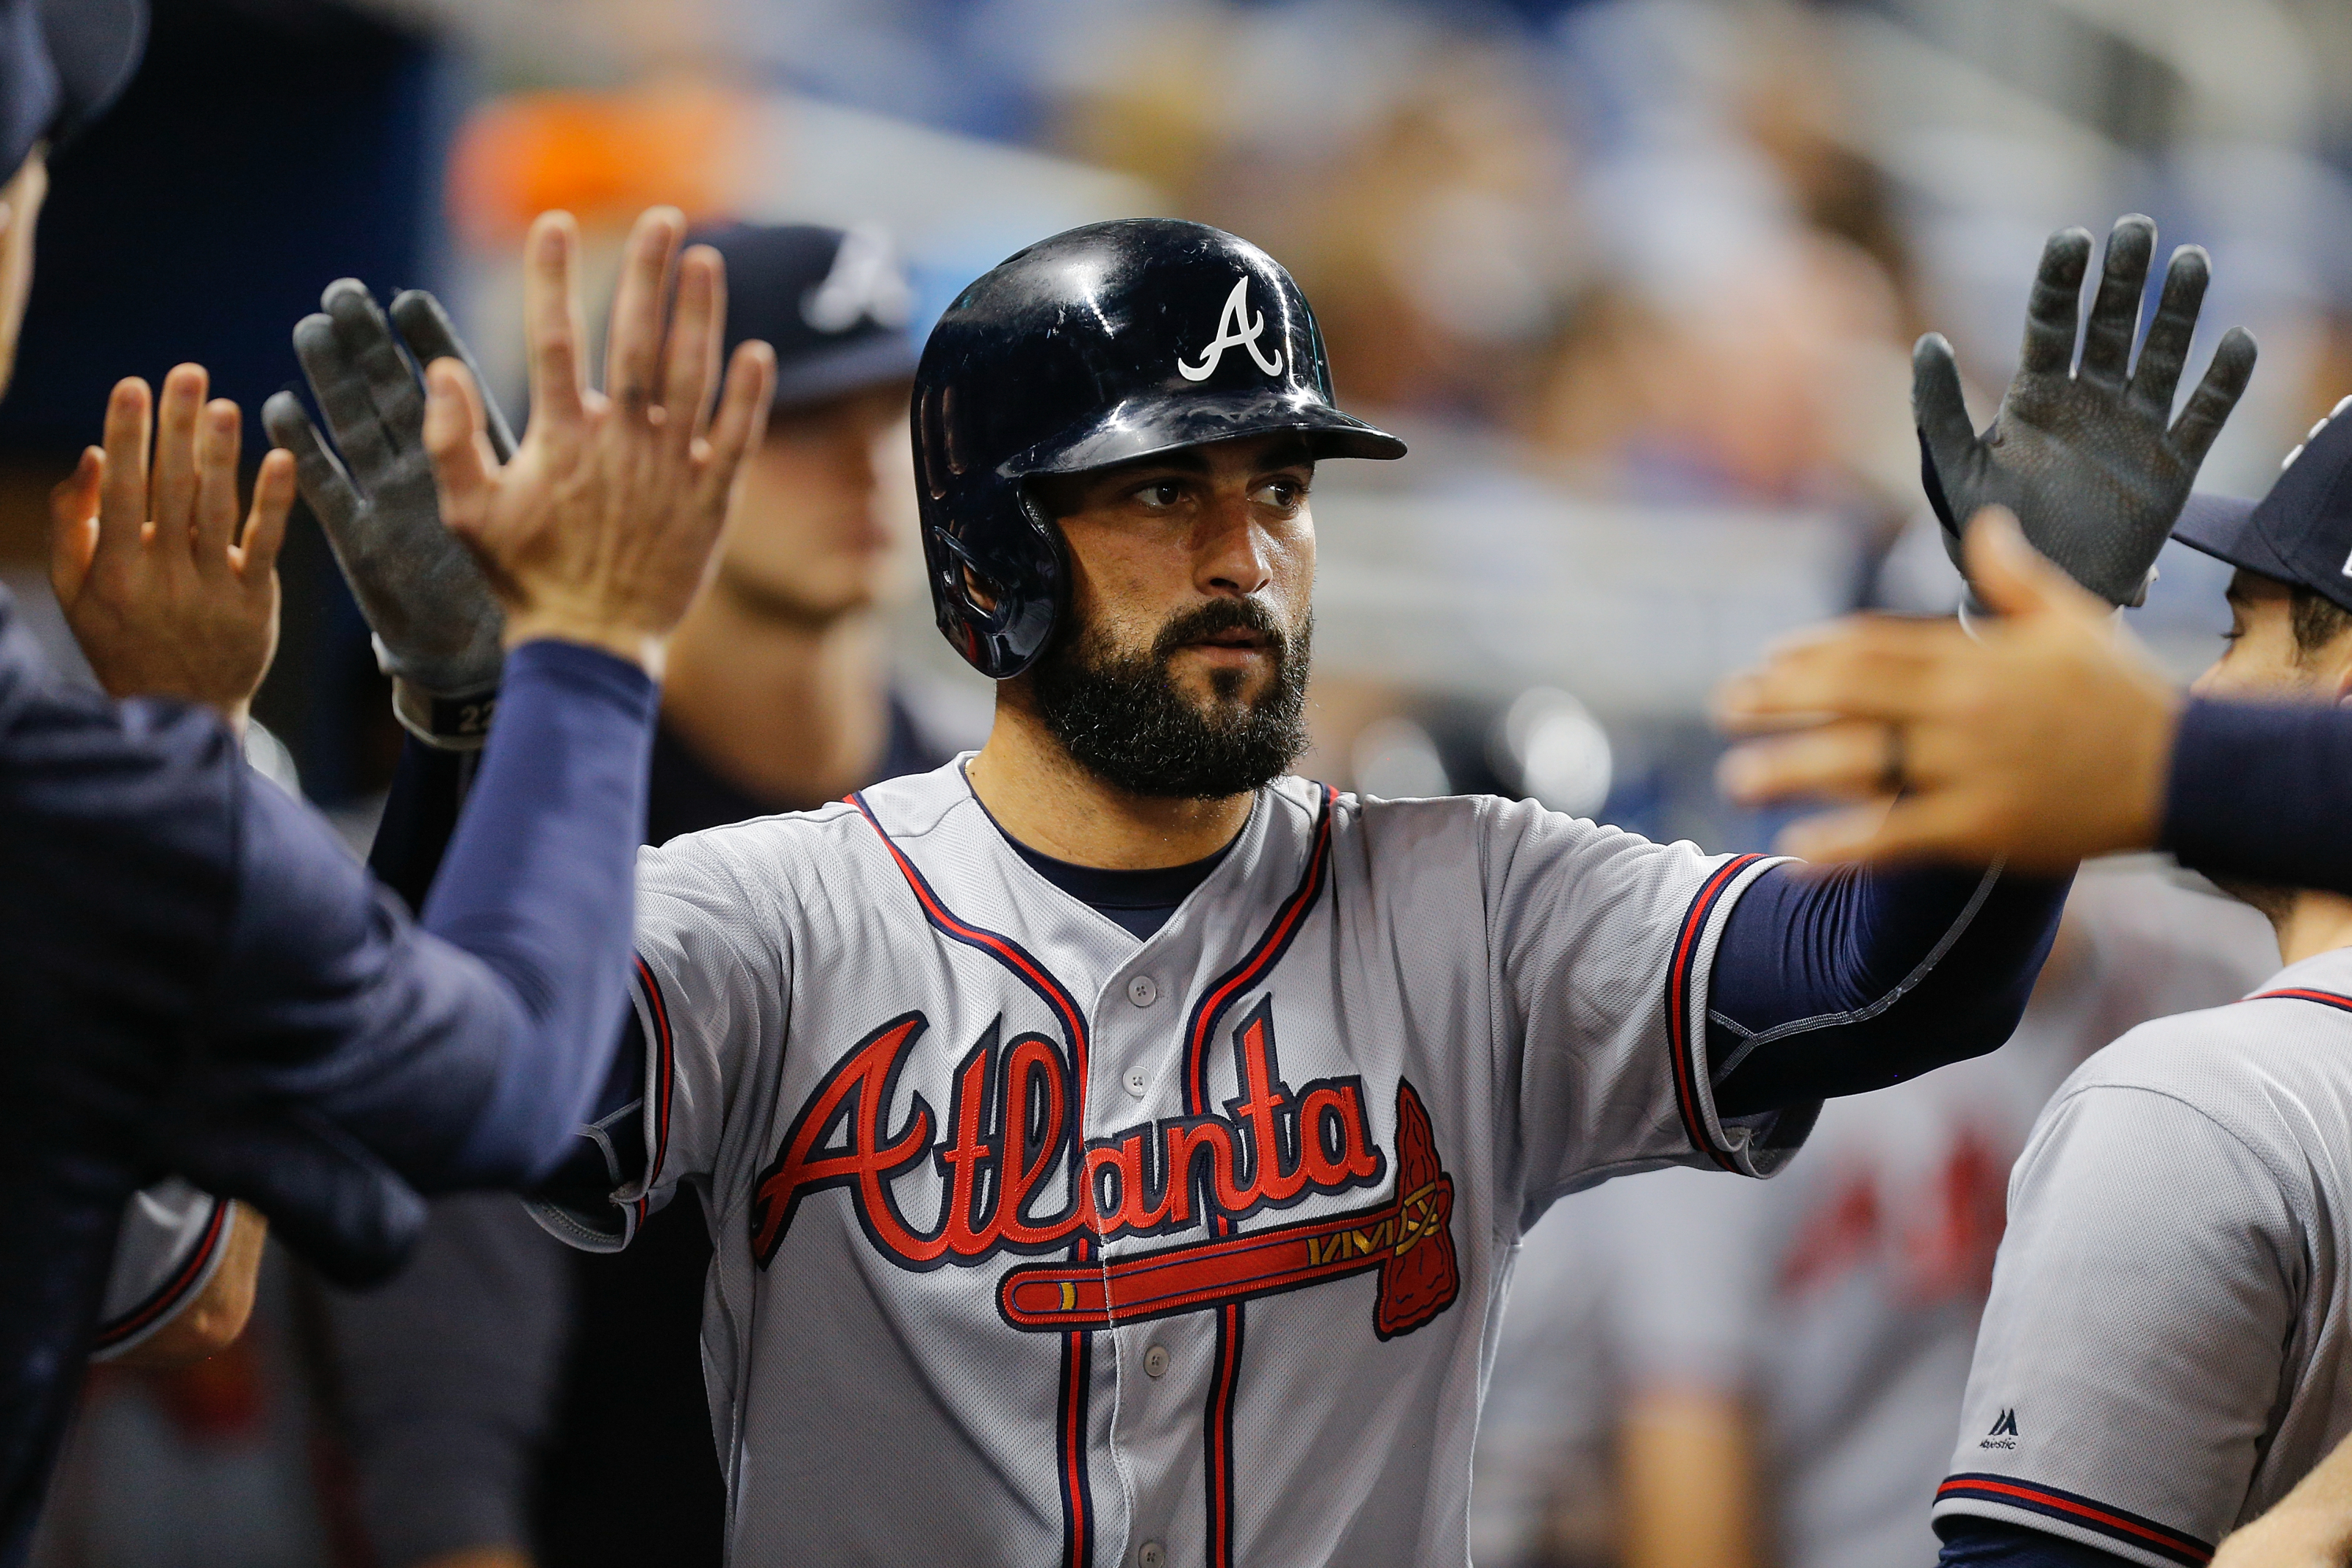 Atlanta Braves Have a Tough Decision to Make With Nick Markakis